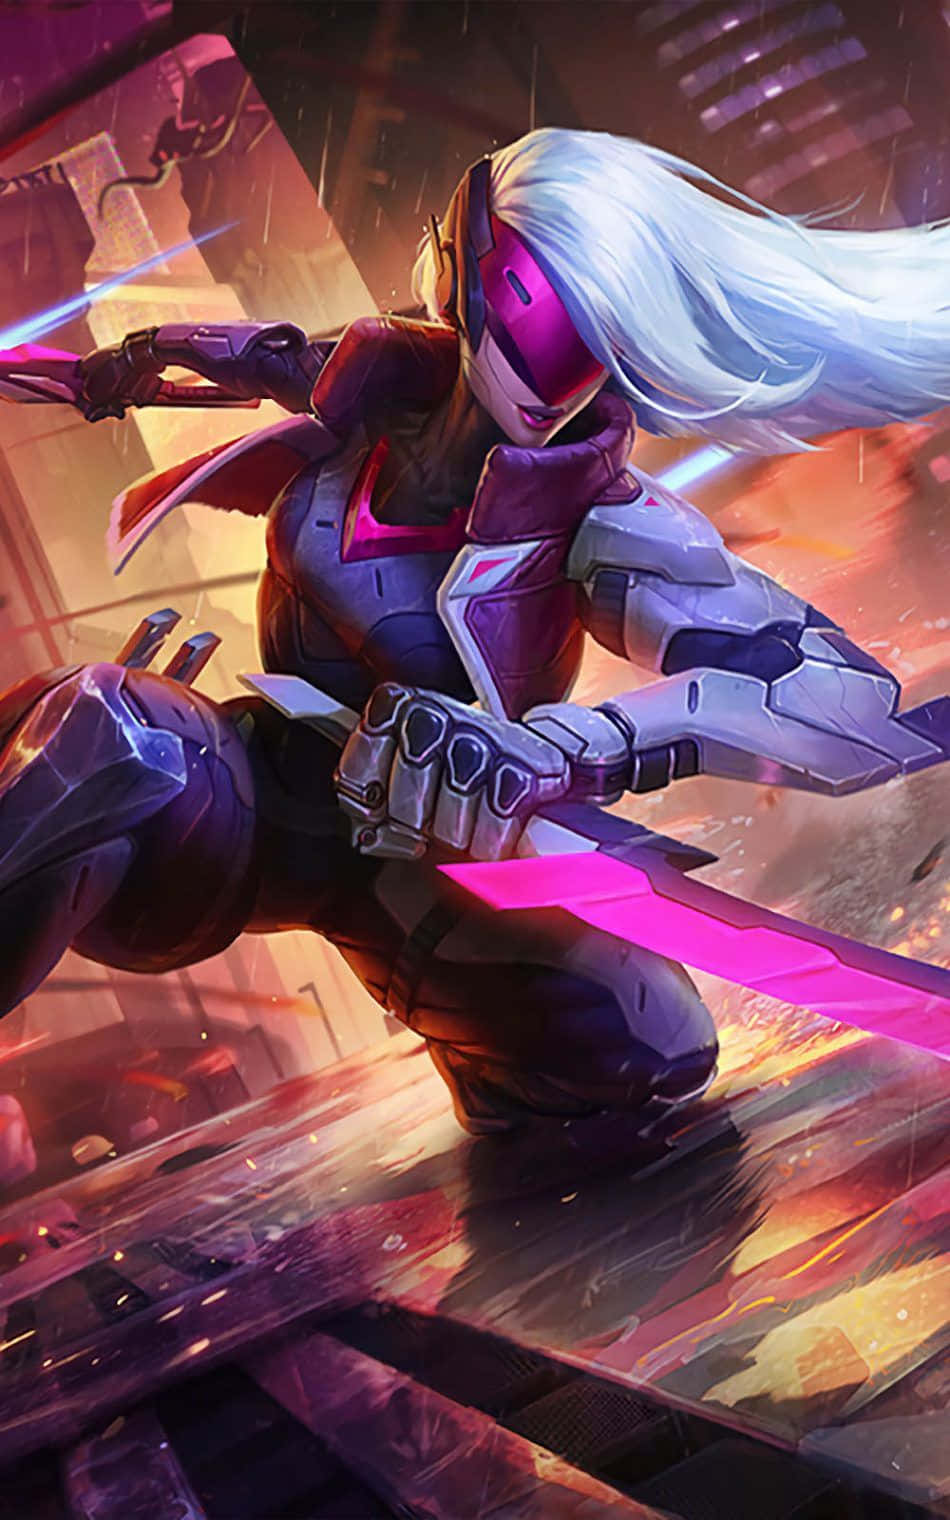 Get Ready For Intense Action With League Of Legends On Your Phone